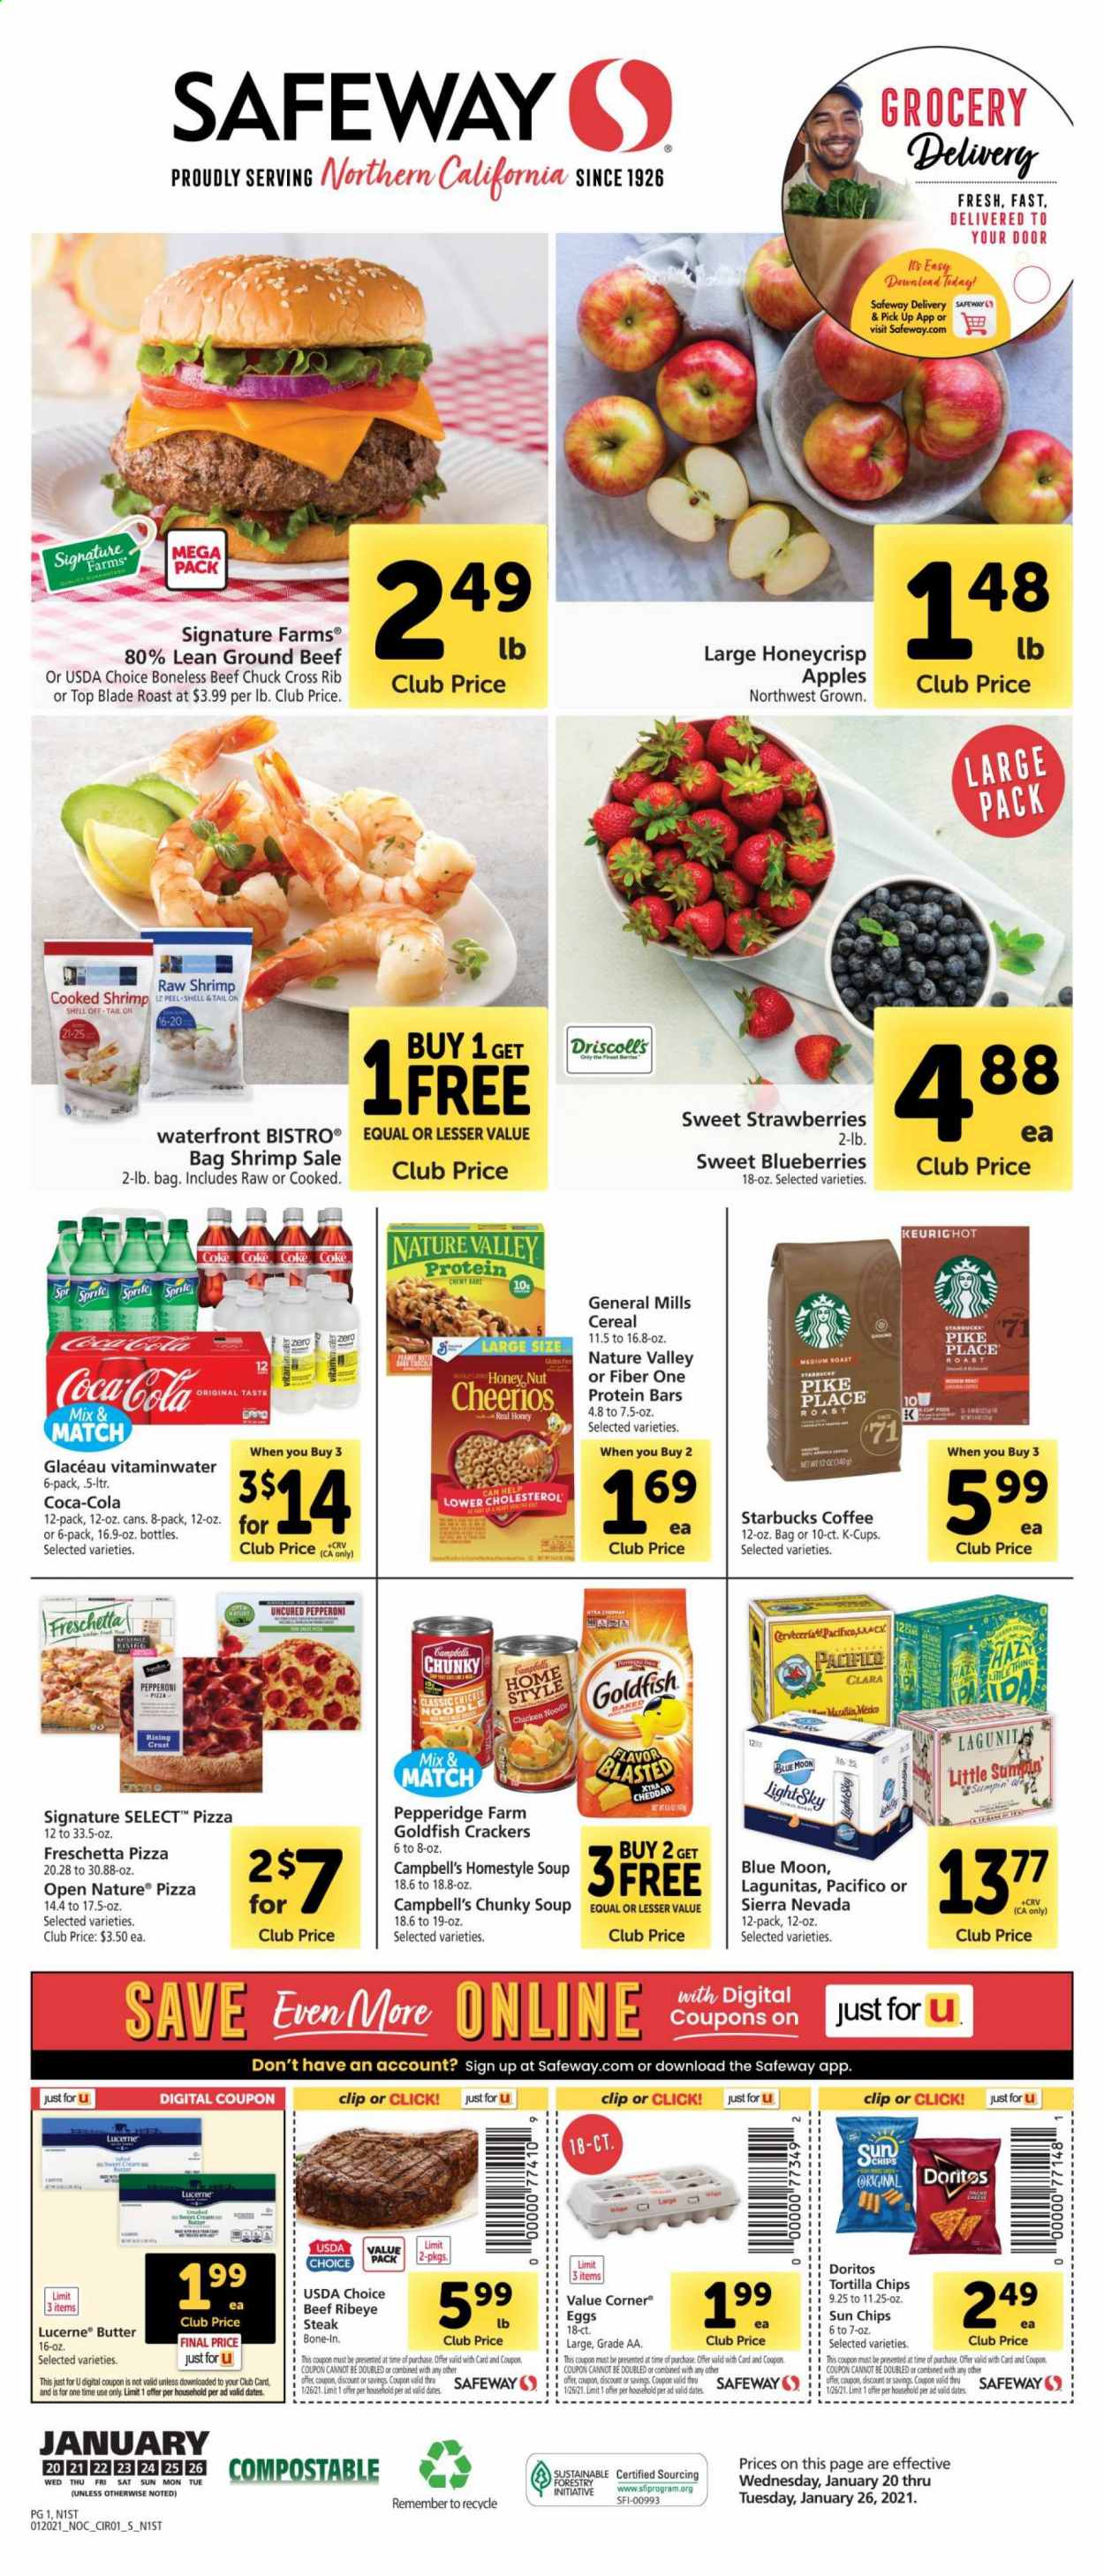 thumbnail - Safeway Flyer - 01/20/2021 - 01/26/2021 - Sales products - blueberries, apples, beef meat, beef steak, ground beef, steak, ribeye steak, top blade, shrimps, Campbell's, pizza, soup, pepperoni, cheddar, eggs, butter, strawberries, crackers, Doritos, tortilla chips, chips, Goldfish, cereals, Cheerios, protein bar, Nature Valley, Fiber One, noodles, dried dates, Coca-Cola, Sprite, coffee, Starbucks, coffee capsules, K-Cups, beer, Blue Moon, XTRA. Page 1.